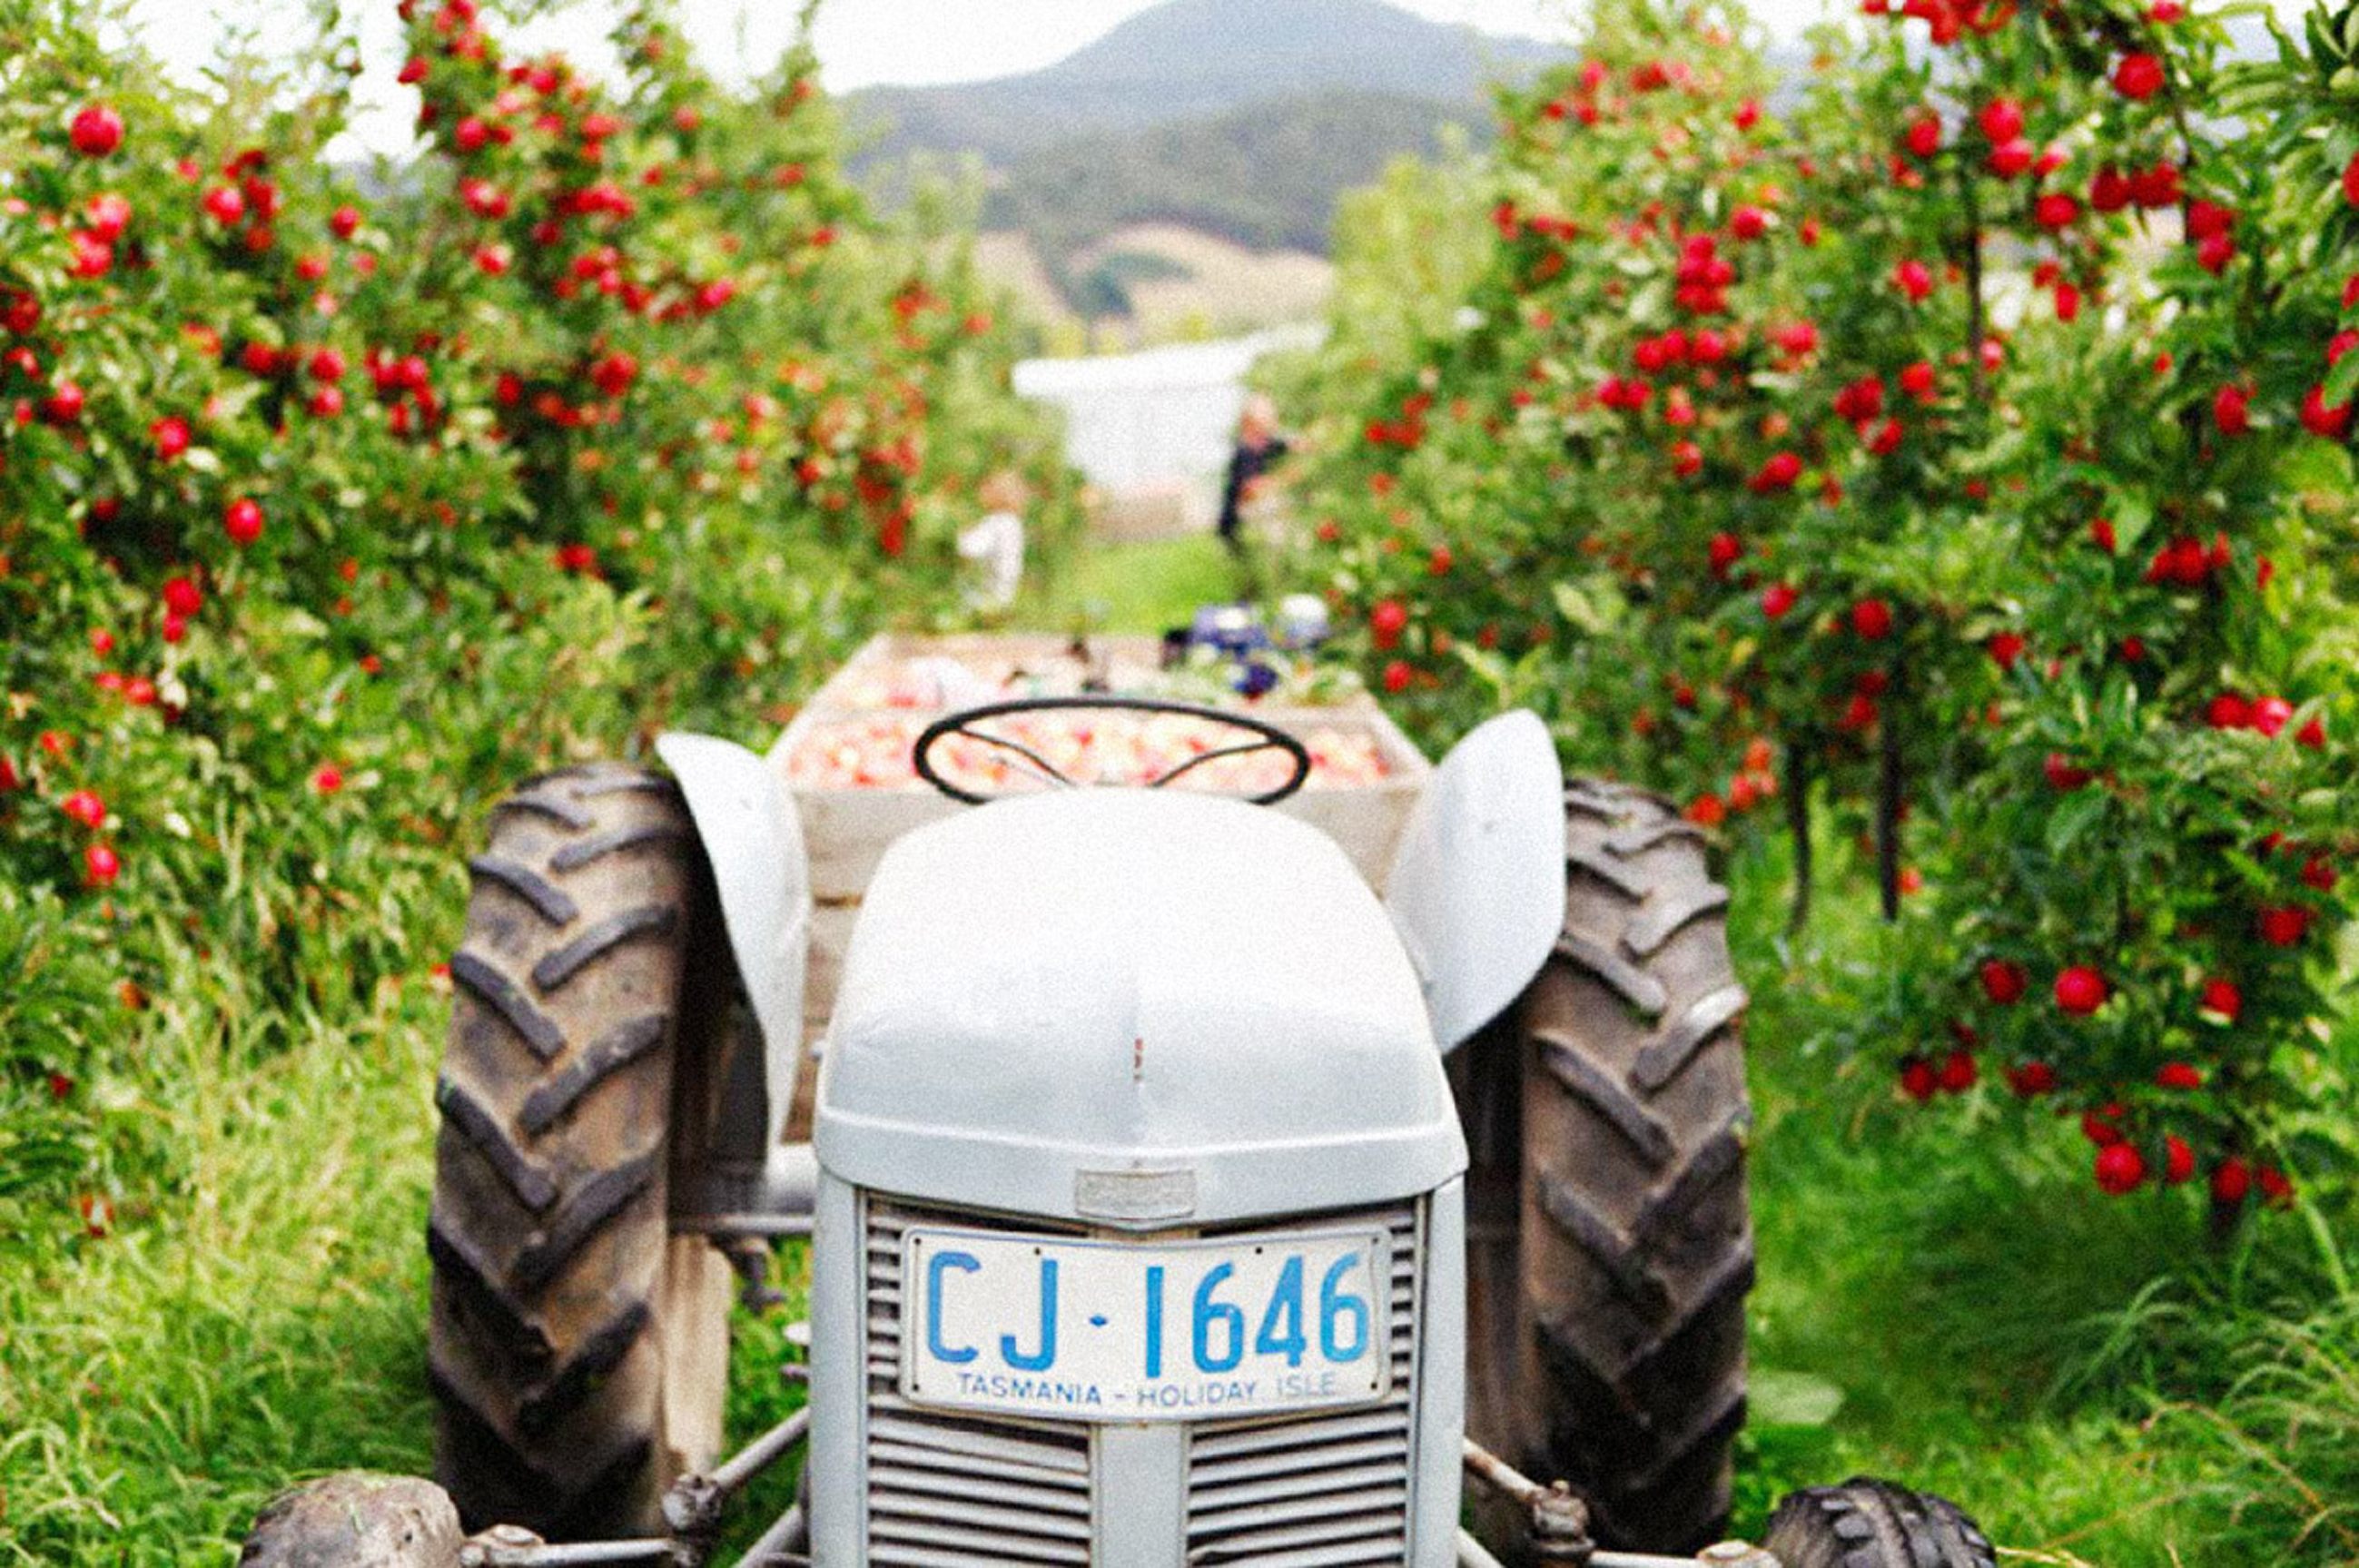 The Willie Smith's orchard in Huon Valley